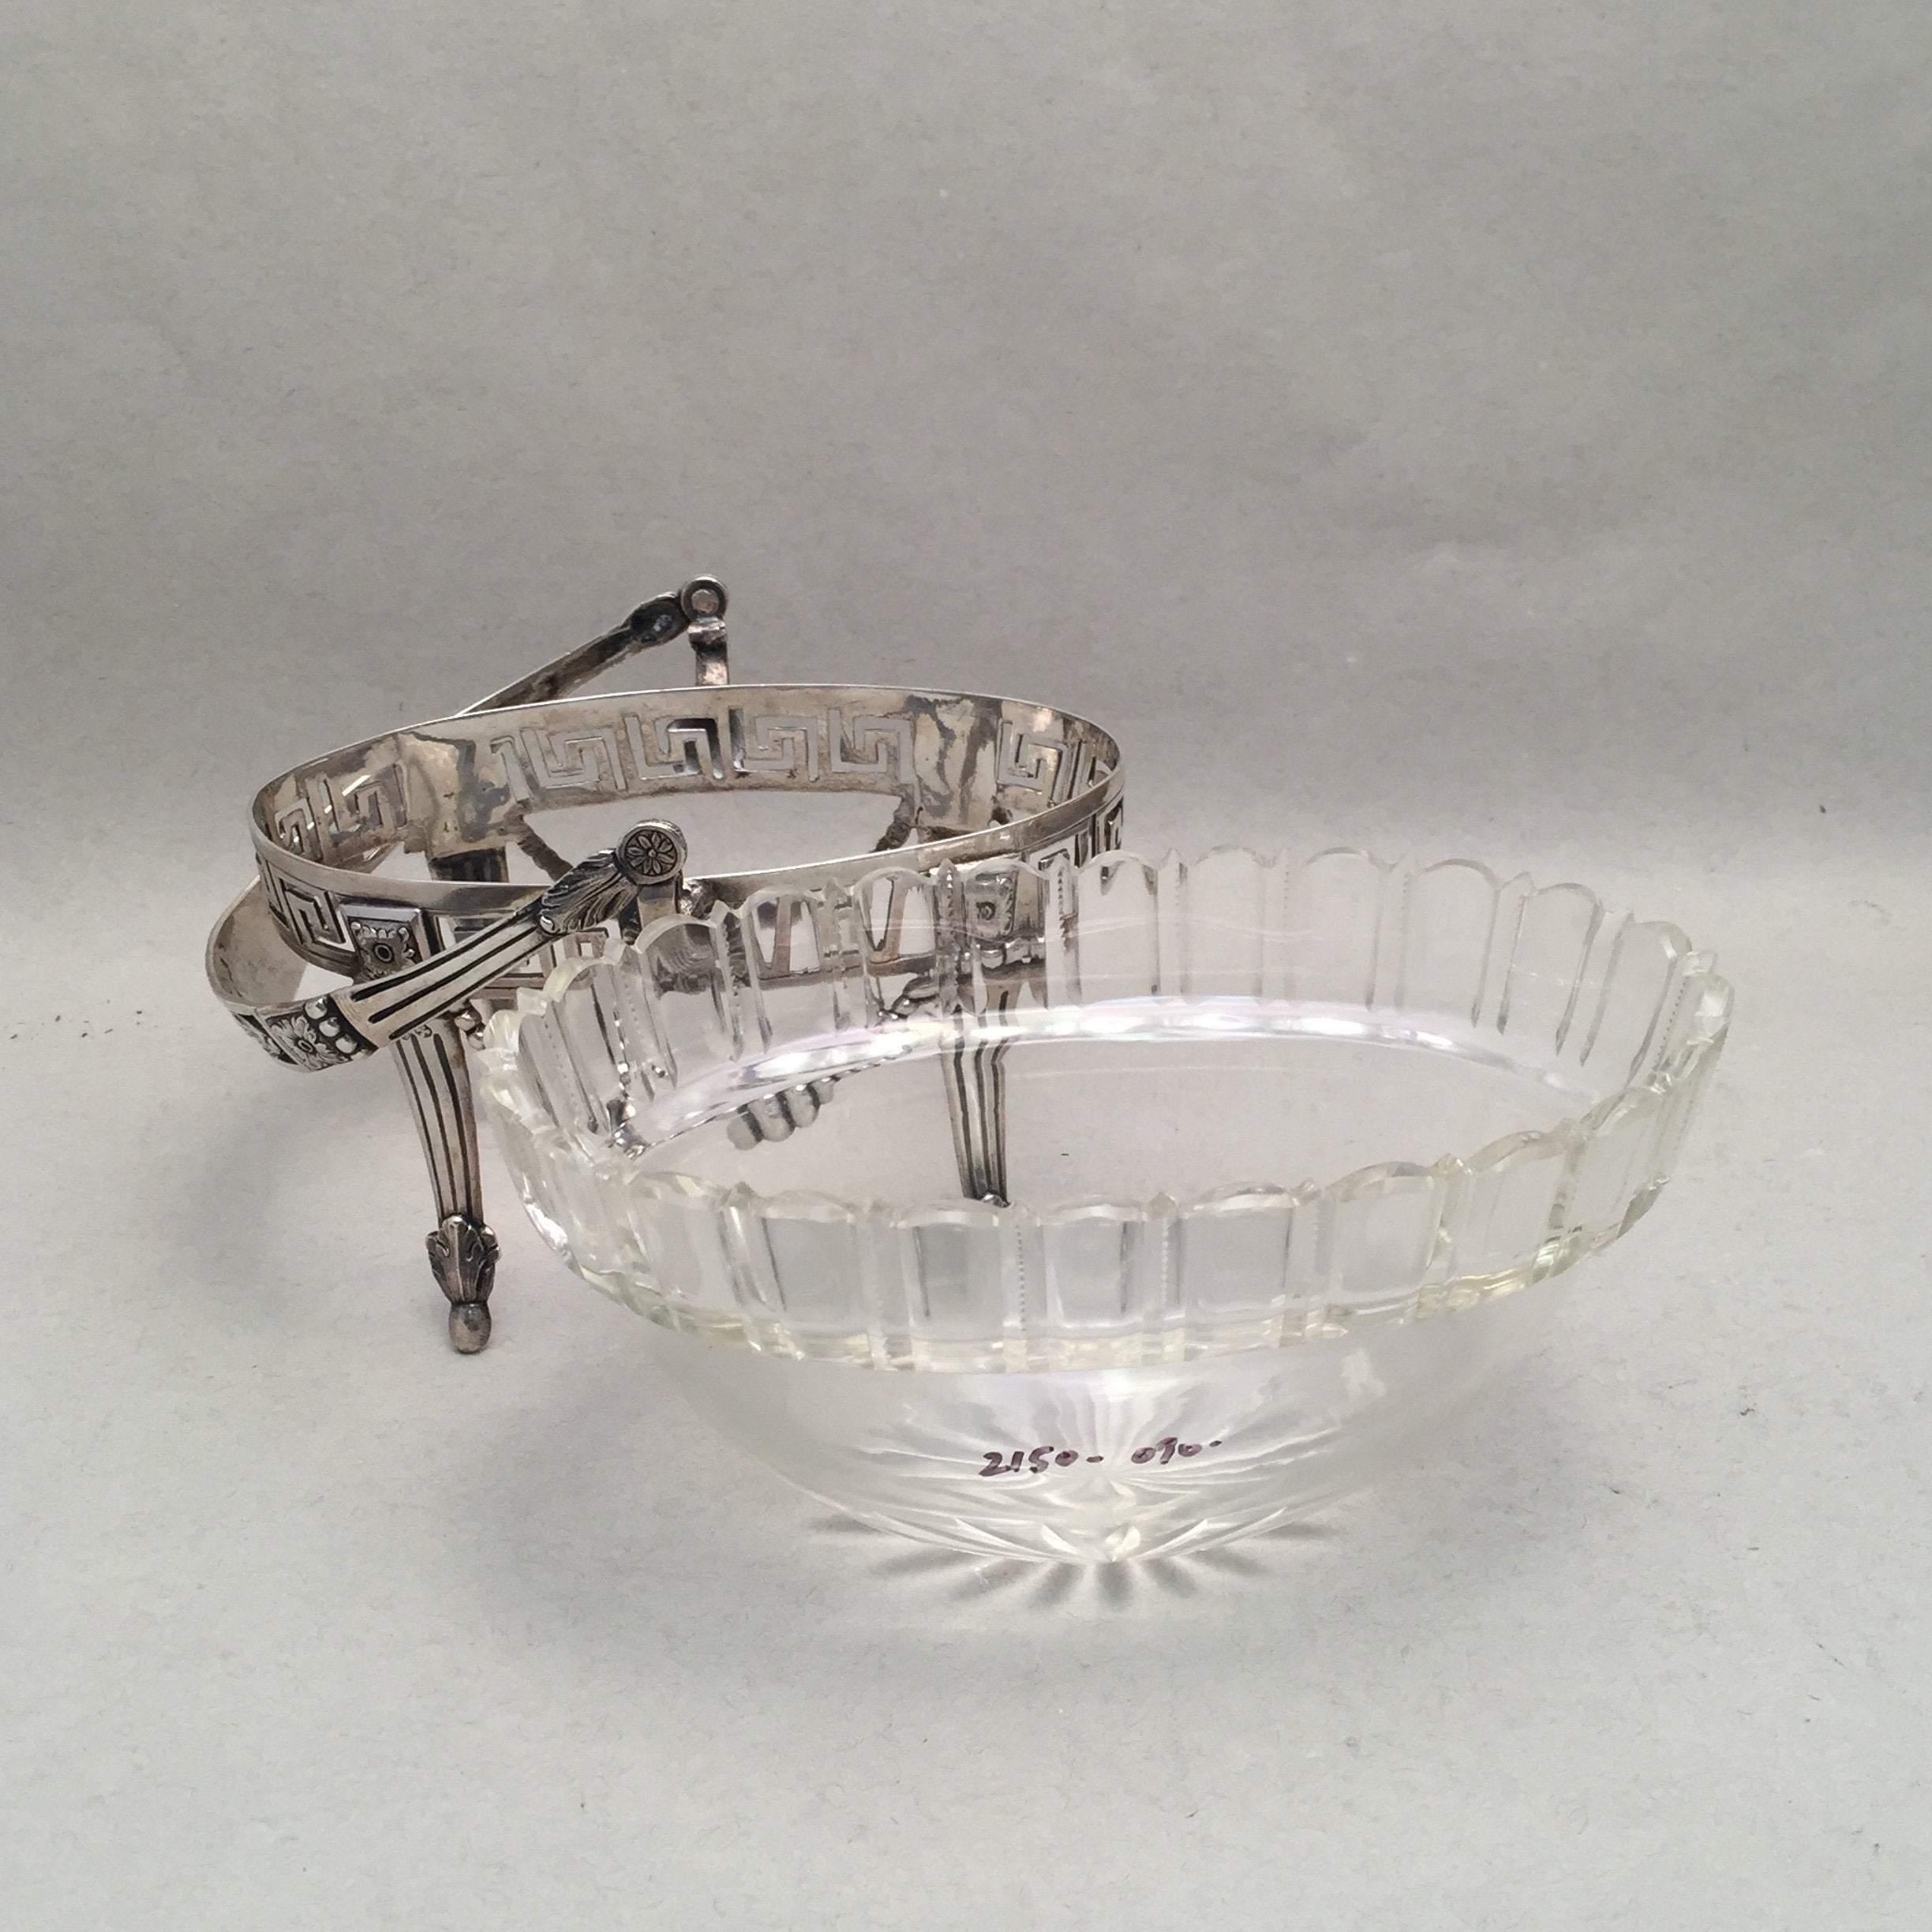 19th Century Coin Silver and Glass Bridal Basket Centerpiece Bowl For Sale